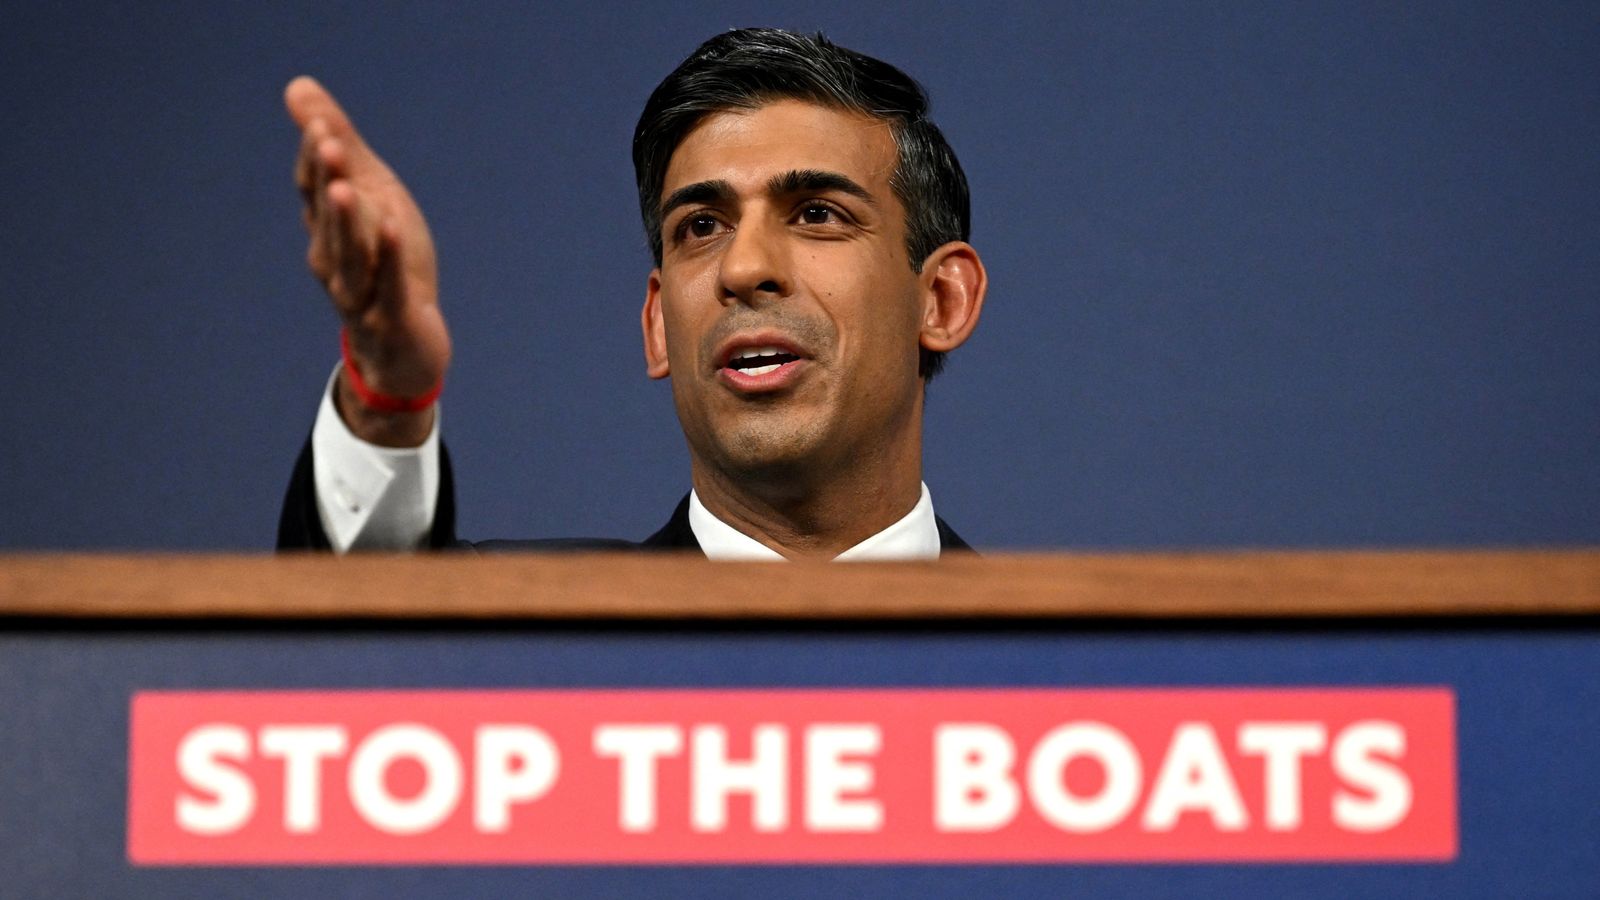 Illegal Migration Bill: Rishi Sunak to face MPs and Labour leader Starmer after unveiling of government's crackdown on Channel migrant crossings